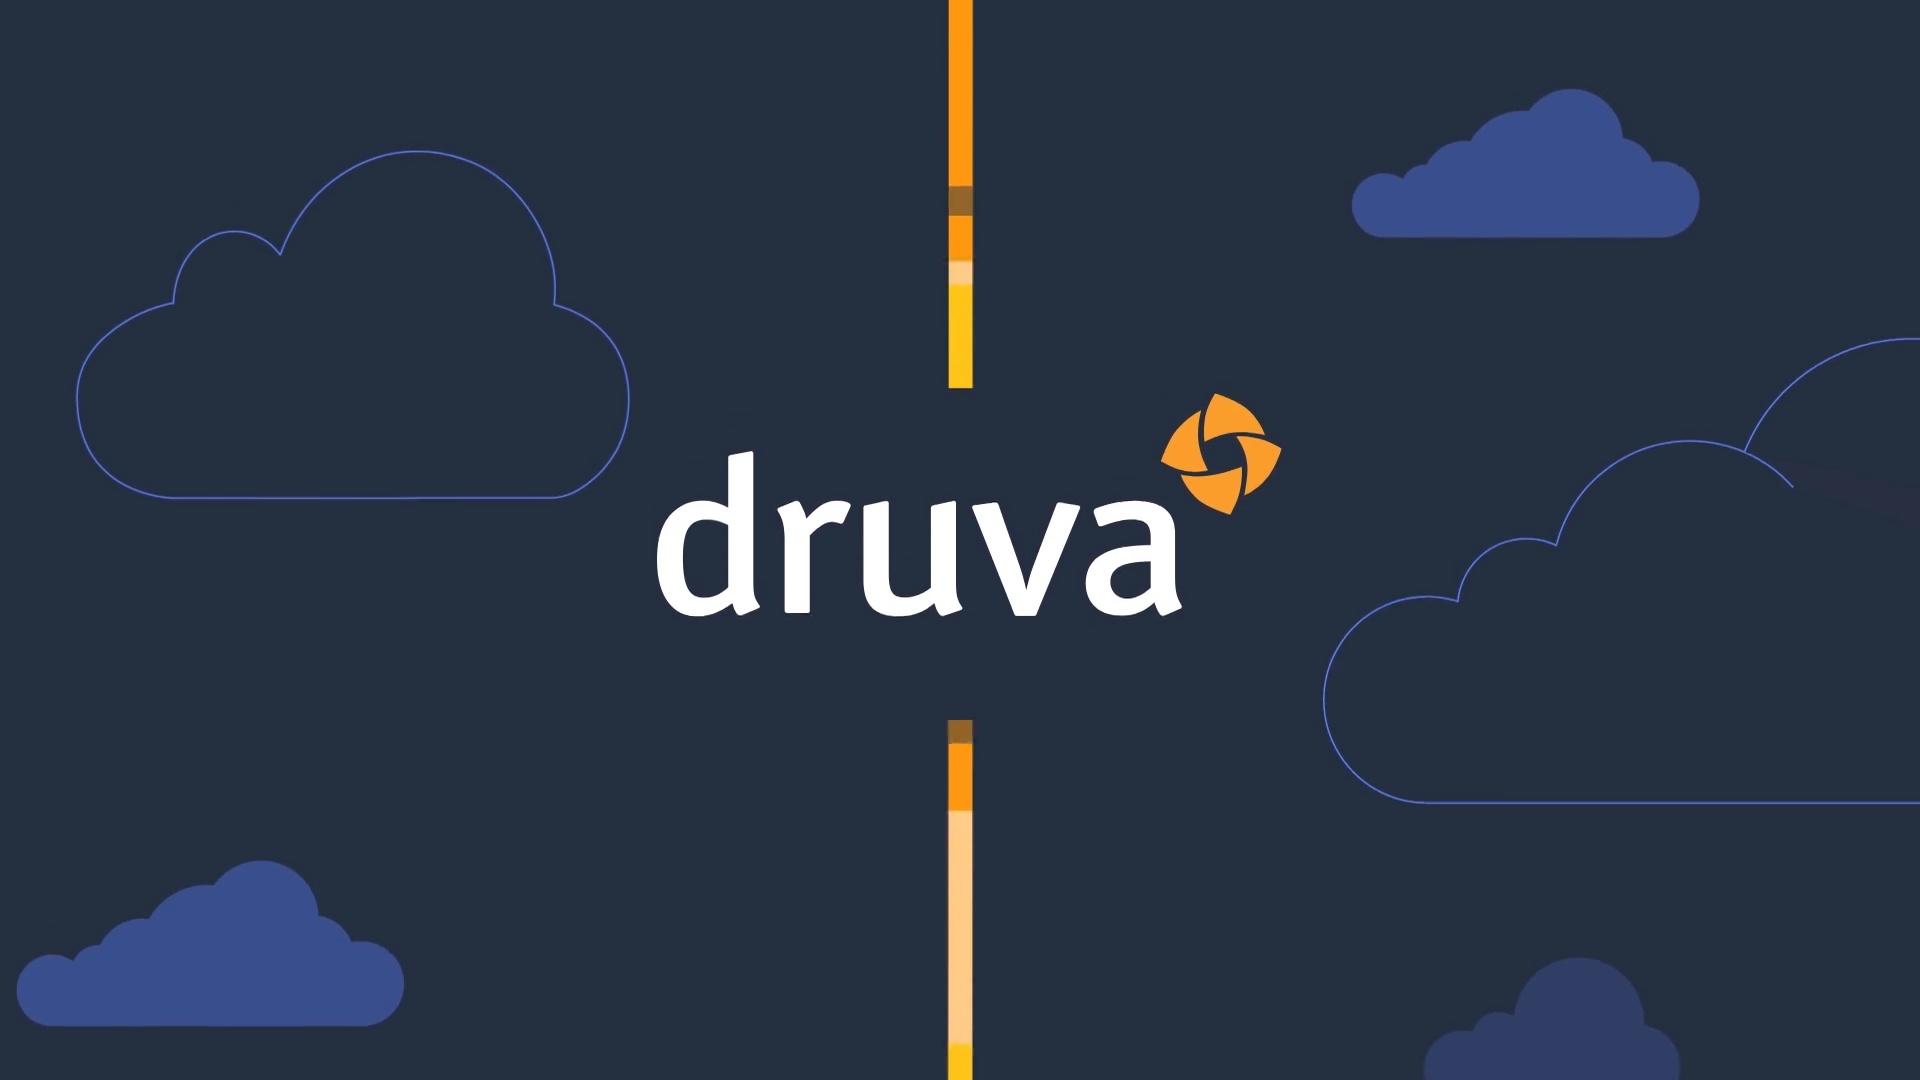 Future-proof your data protection with Druva, powered by AWS